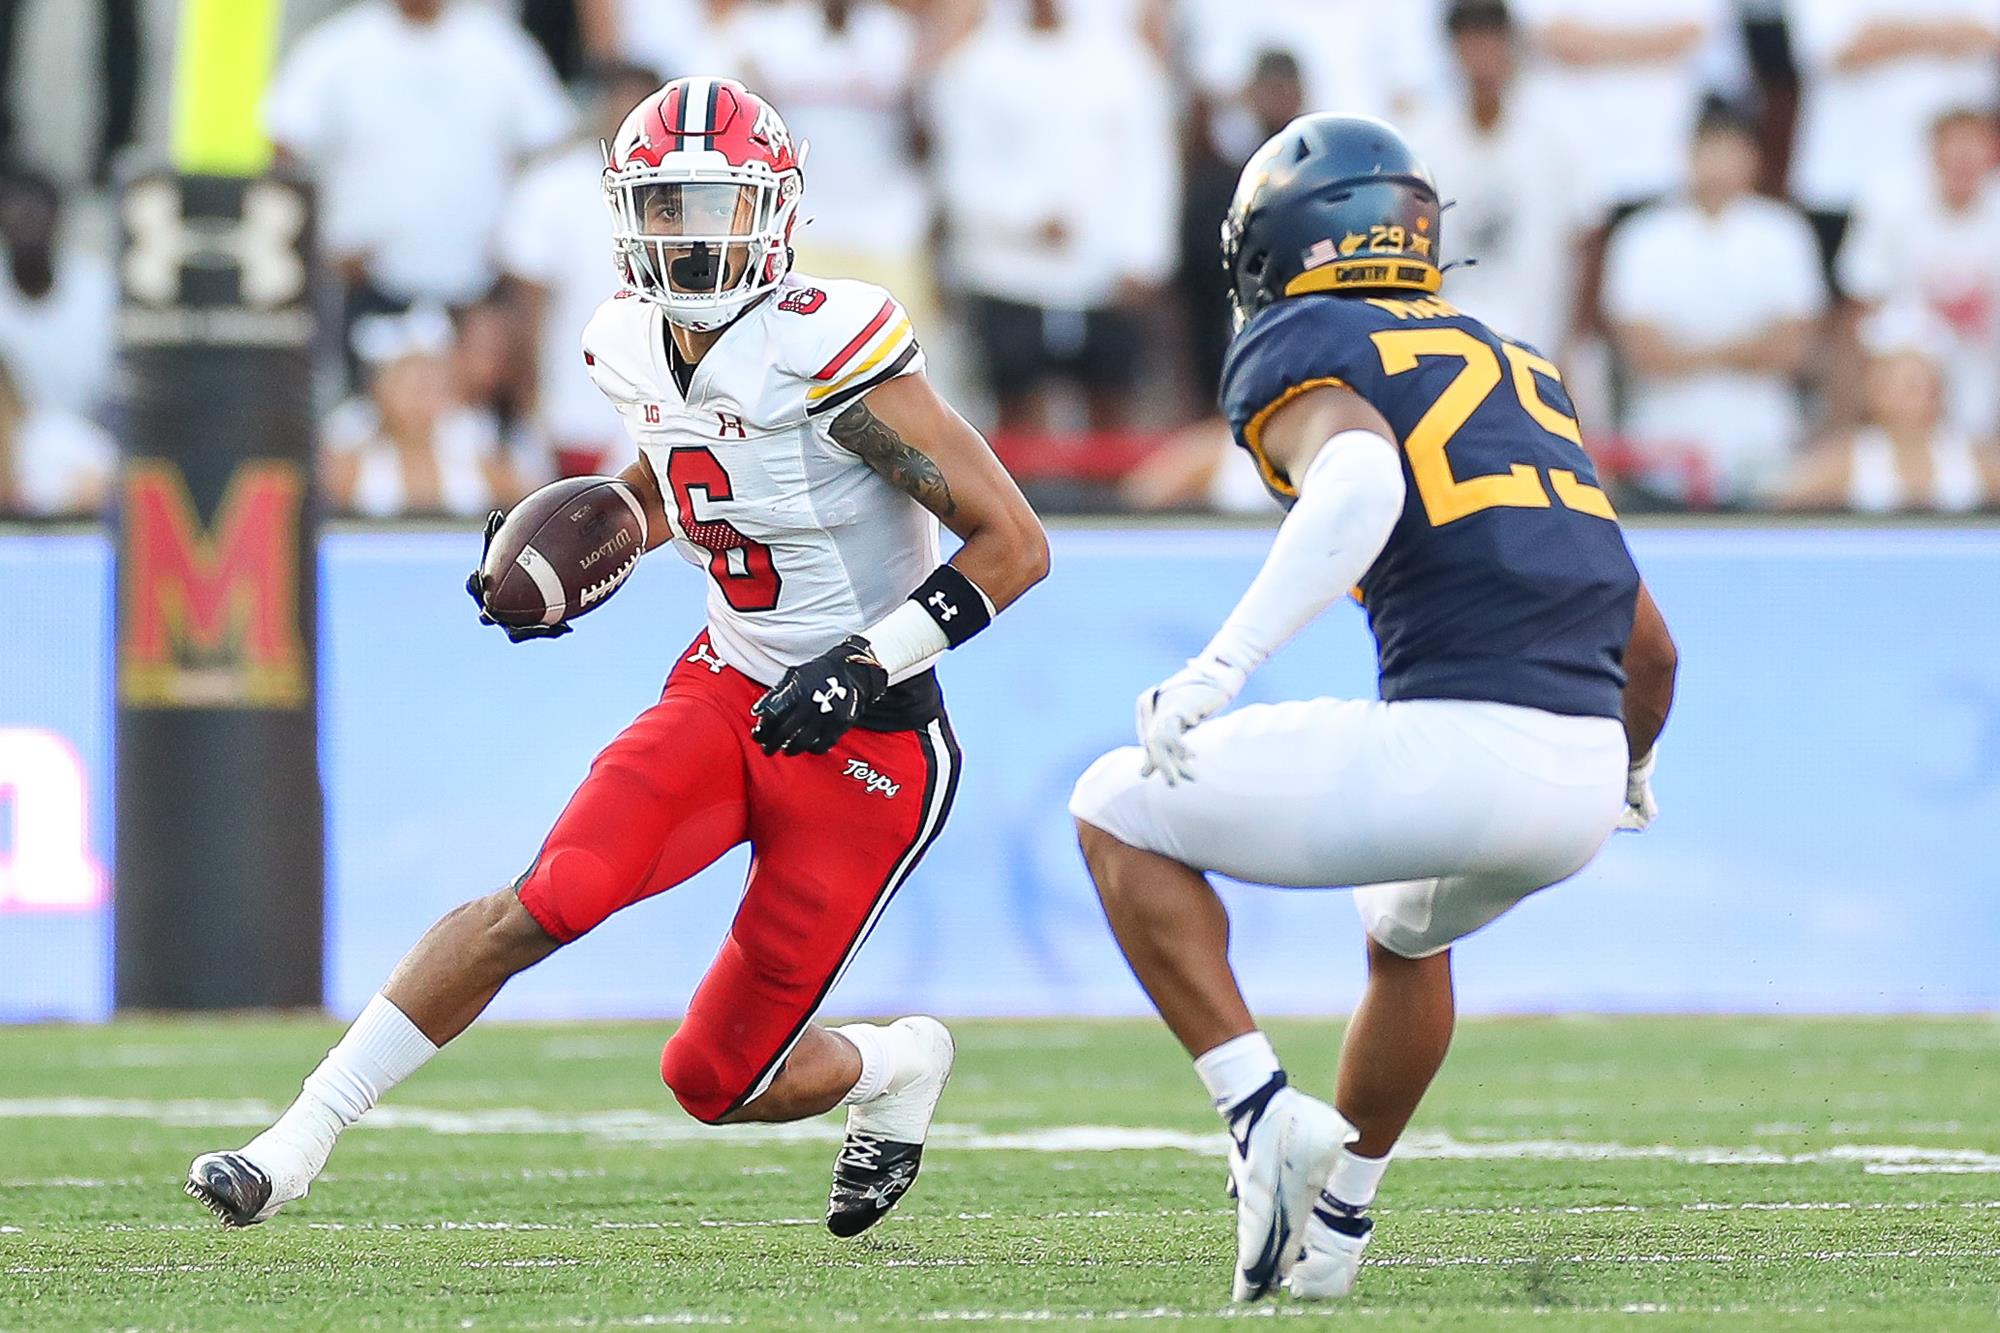 Jeshaun Jones is an underrated receiver out of Maryland who's a good route runner with quality speed. Hula Bowl scout Justyce Gordon breaks down Jones as an NFL Prospect in his report.